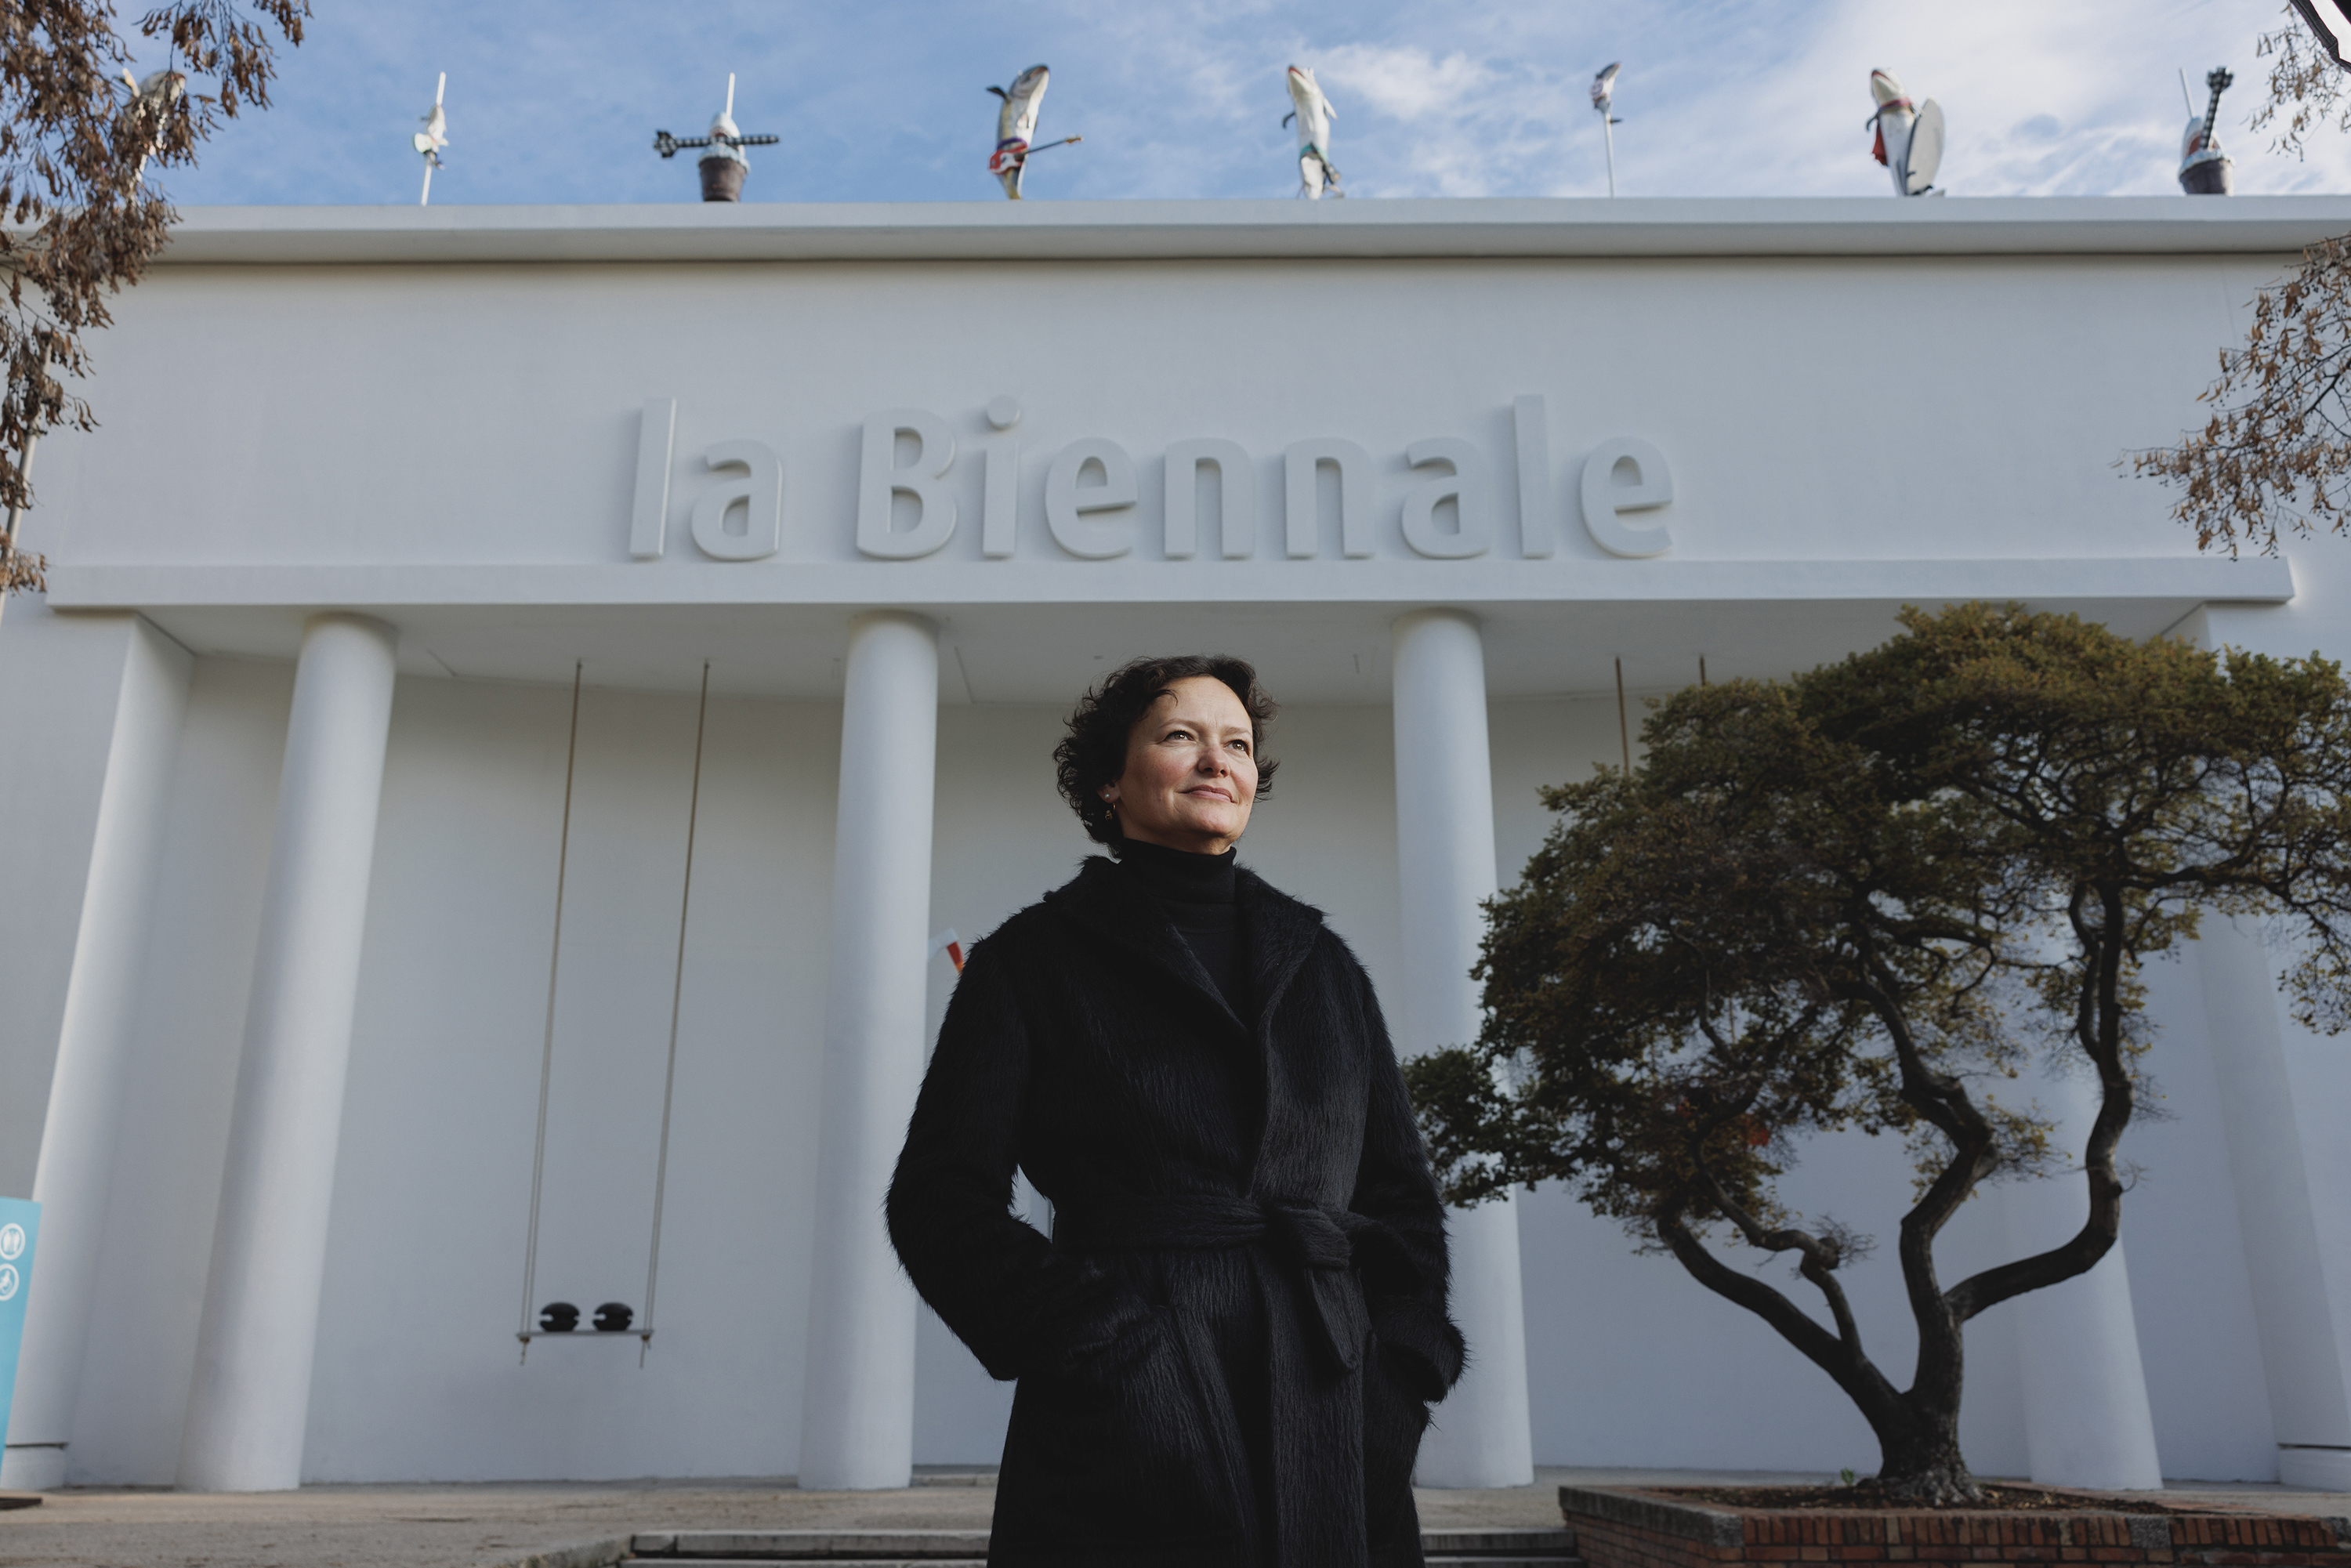 A woman in a black coat stands outside near a white building that has the name “la Biennale” on the top. She has a light skin tone and her dark brown hair is short and curly. A tree is in the background and she stares out, looking into the distance.